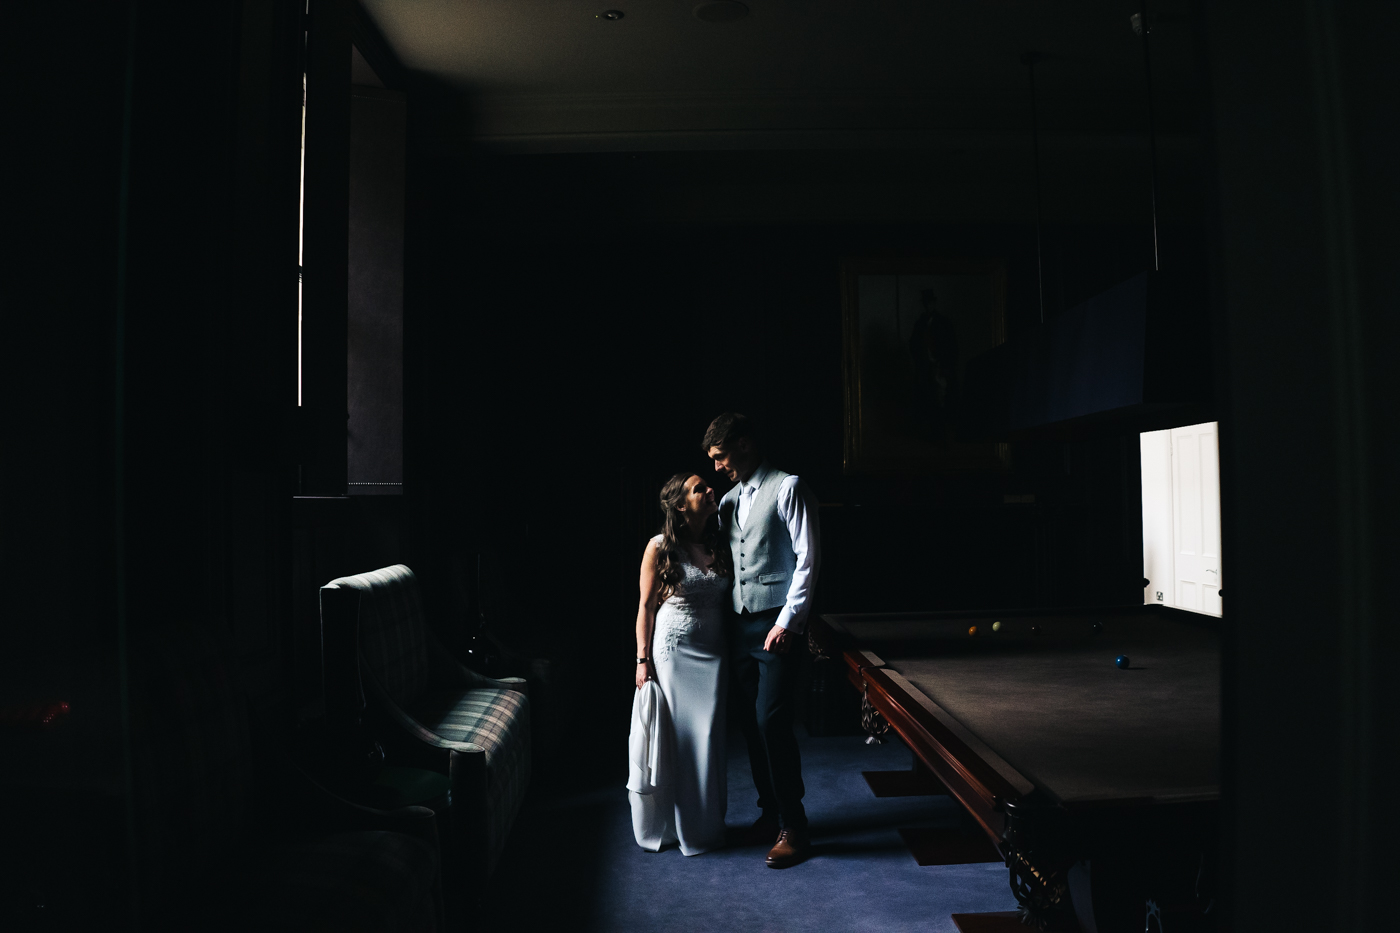 stancliffe-hall-derbyshire-wedding-photographer-photography-creative-relaxed-wedding-0047.jpg